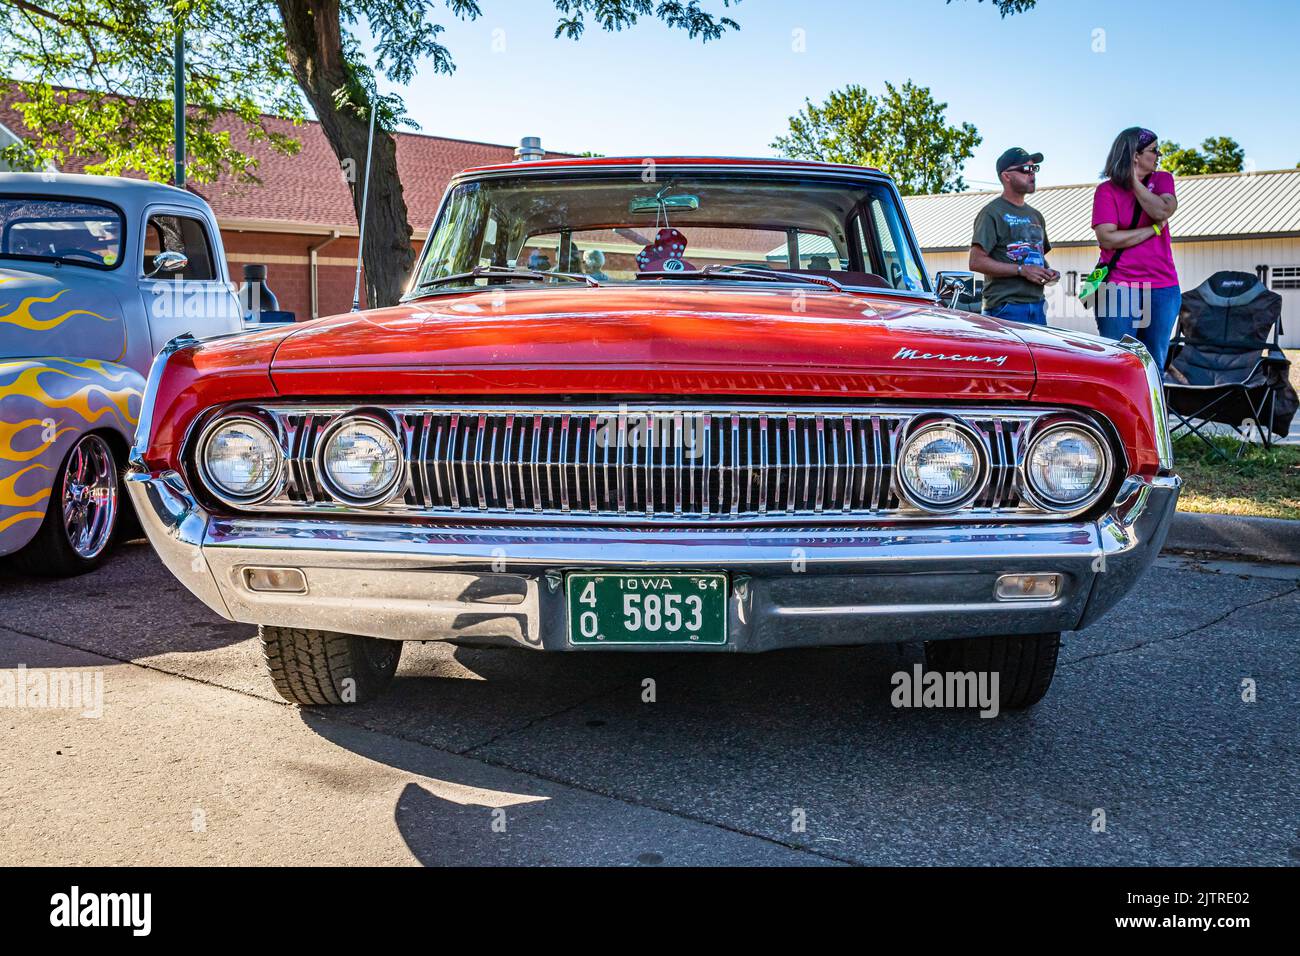 Falcon Heights, MN - June 17, 2022: Low perspective front view of a 1964 Mercury Montclair Breezeway Sedan at a local car show. Stock Photo